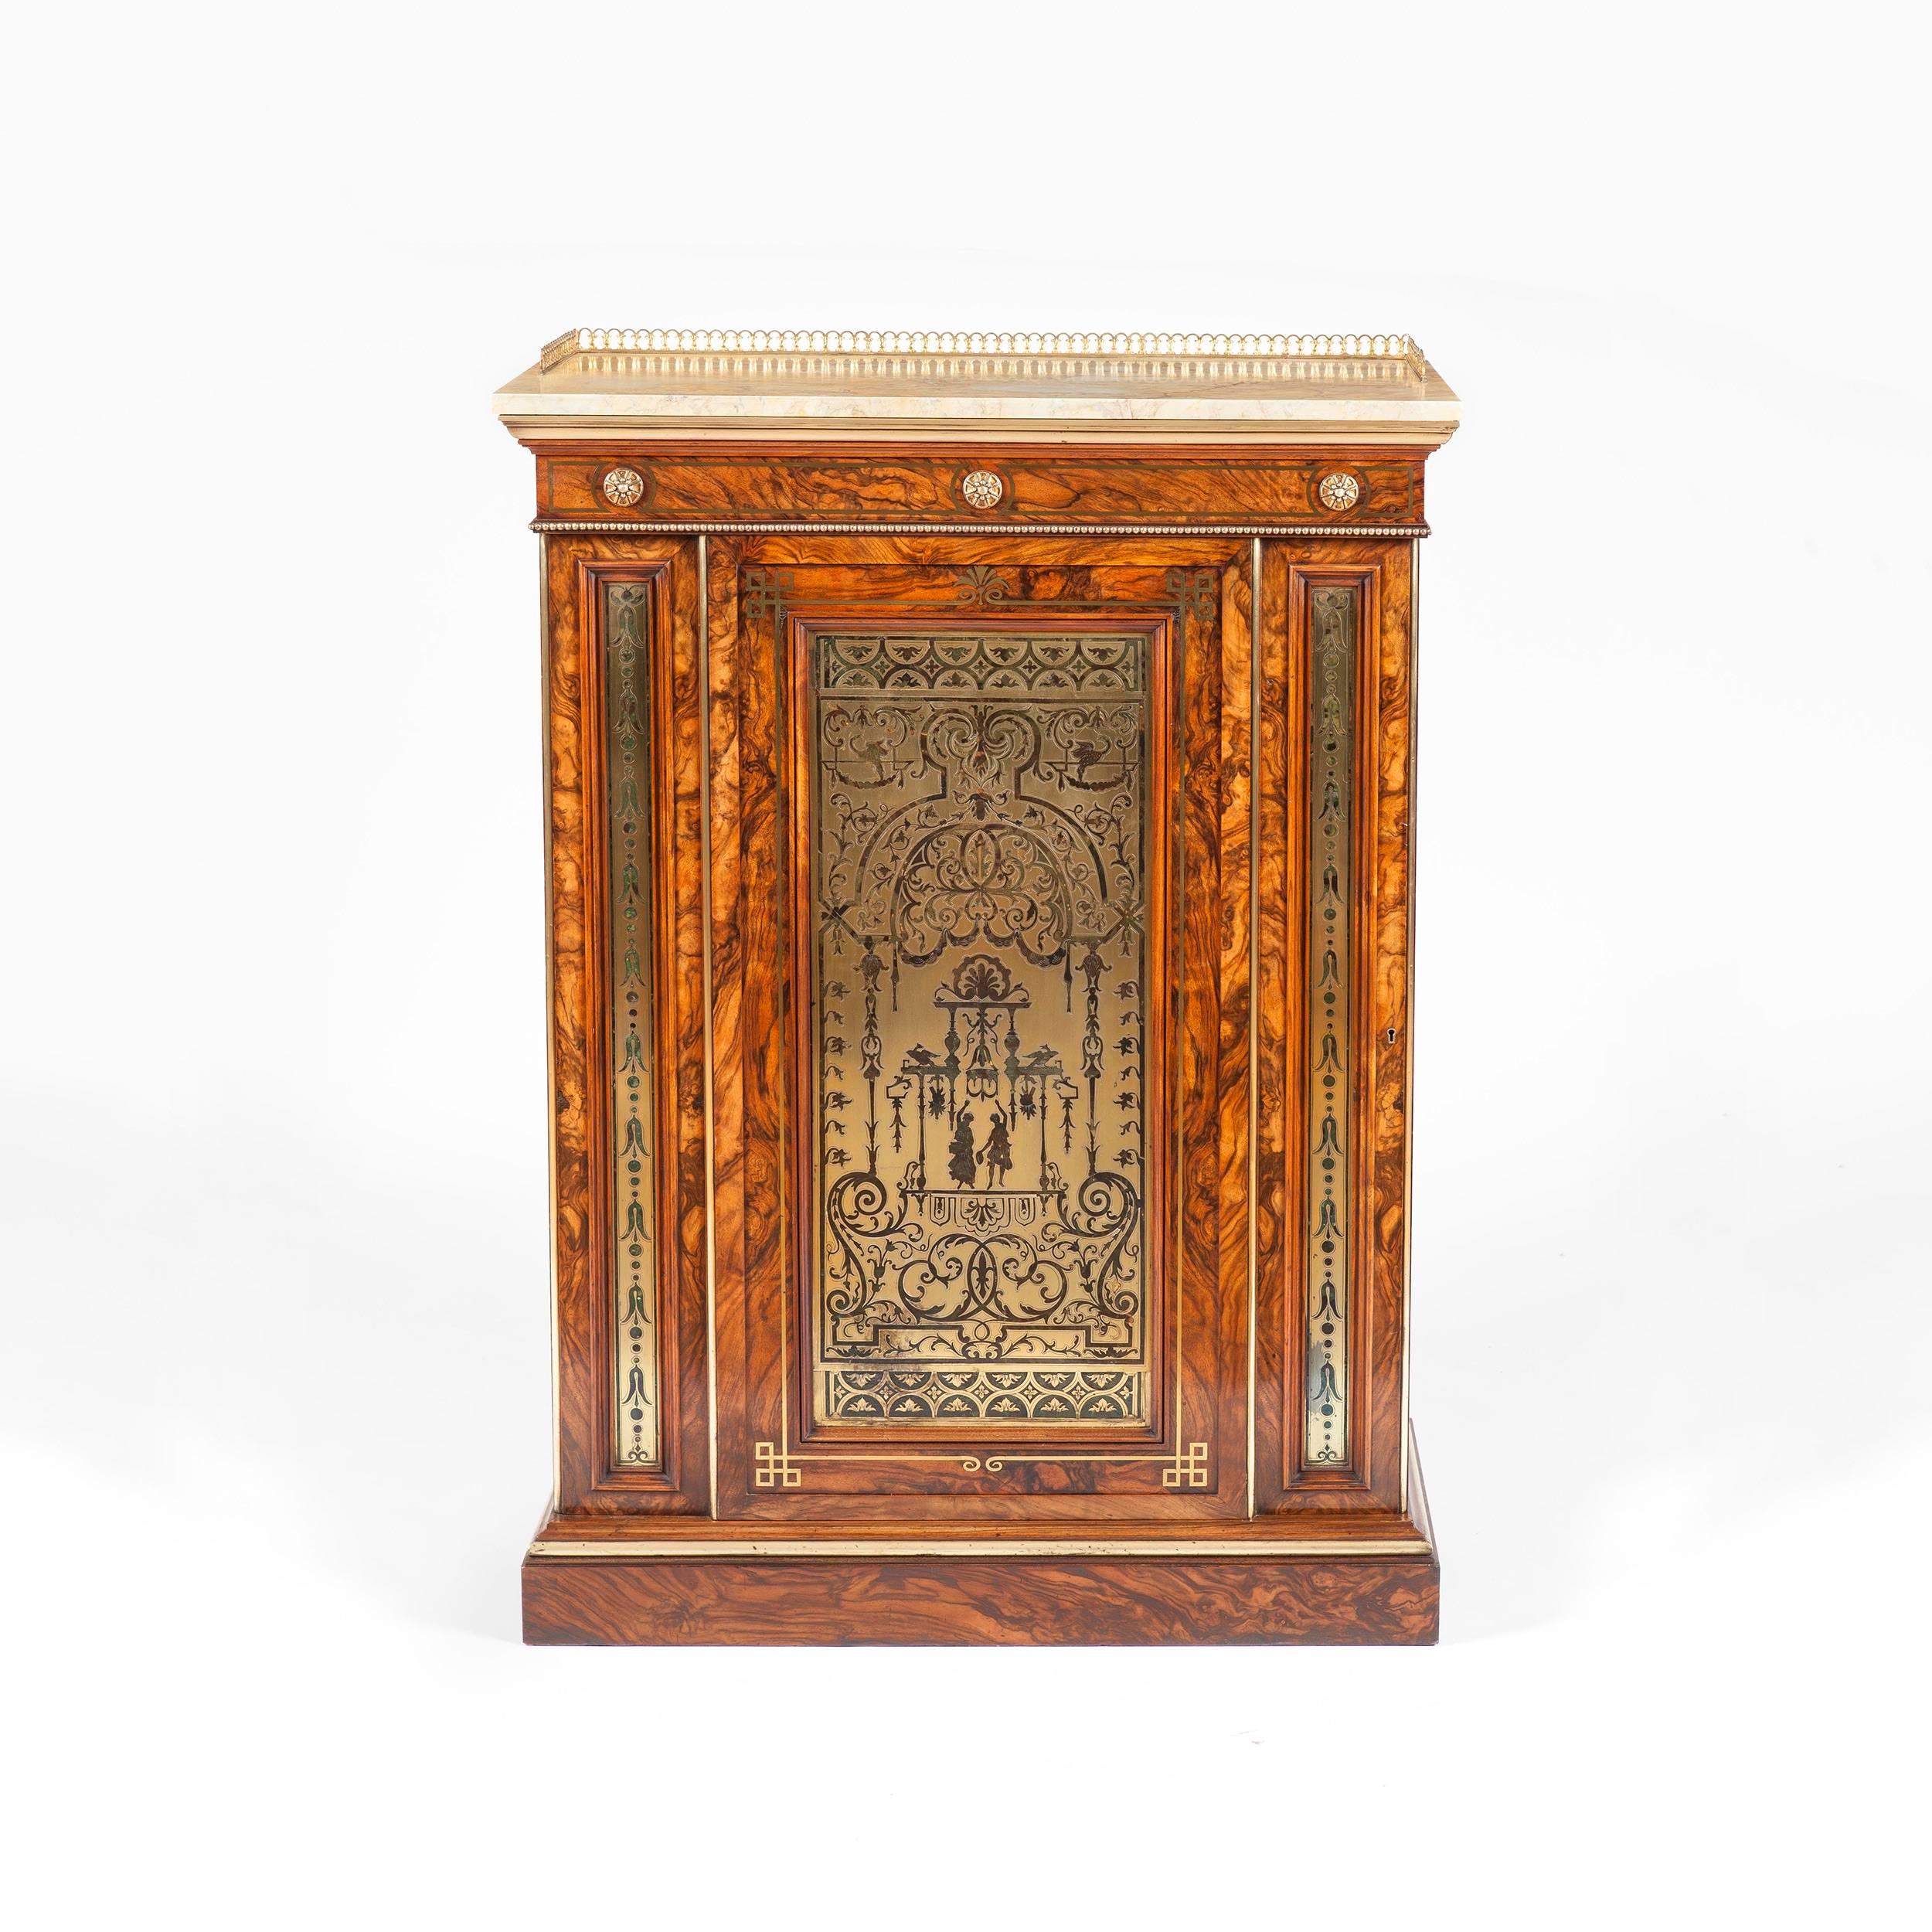 A William IV cabinet attributed to Town and Emmanuel

Constructed in a strongly grained olivewood and dressed with gold brass inlays and an etched and engraved brass panel; rising from a plinth base, the lockable single door having an inset panel in